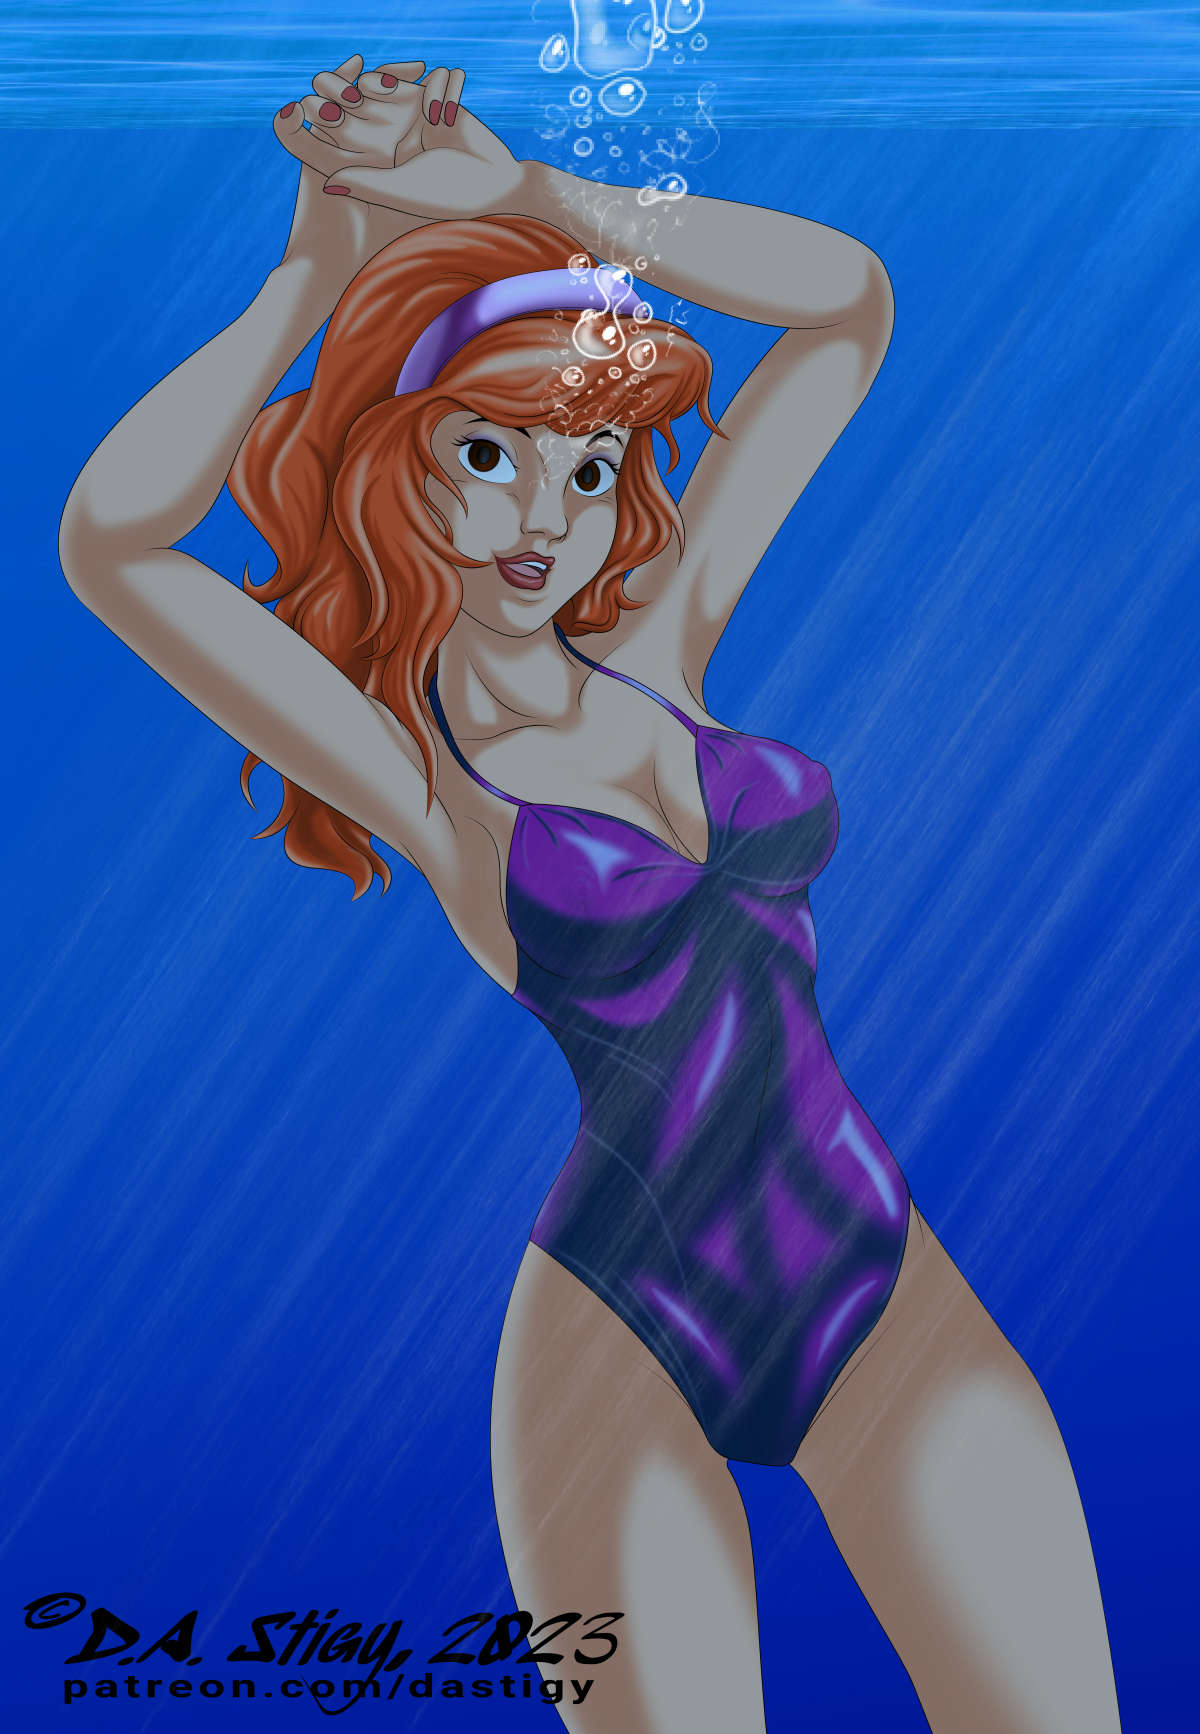 Daphne Blake, posing underwater in a tight shinny swimsuit.